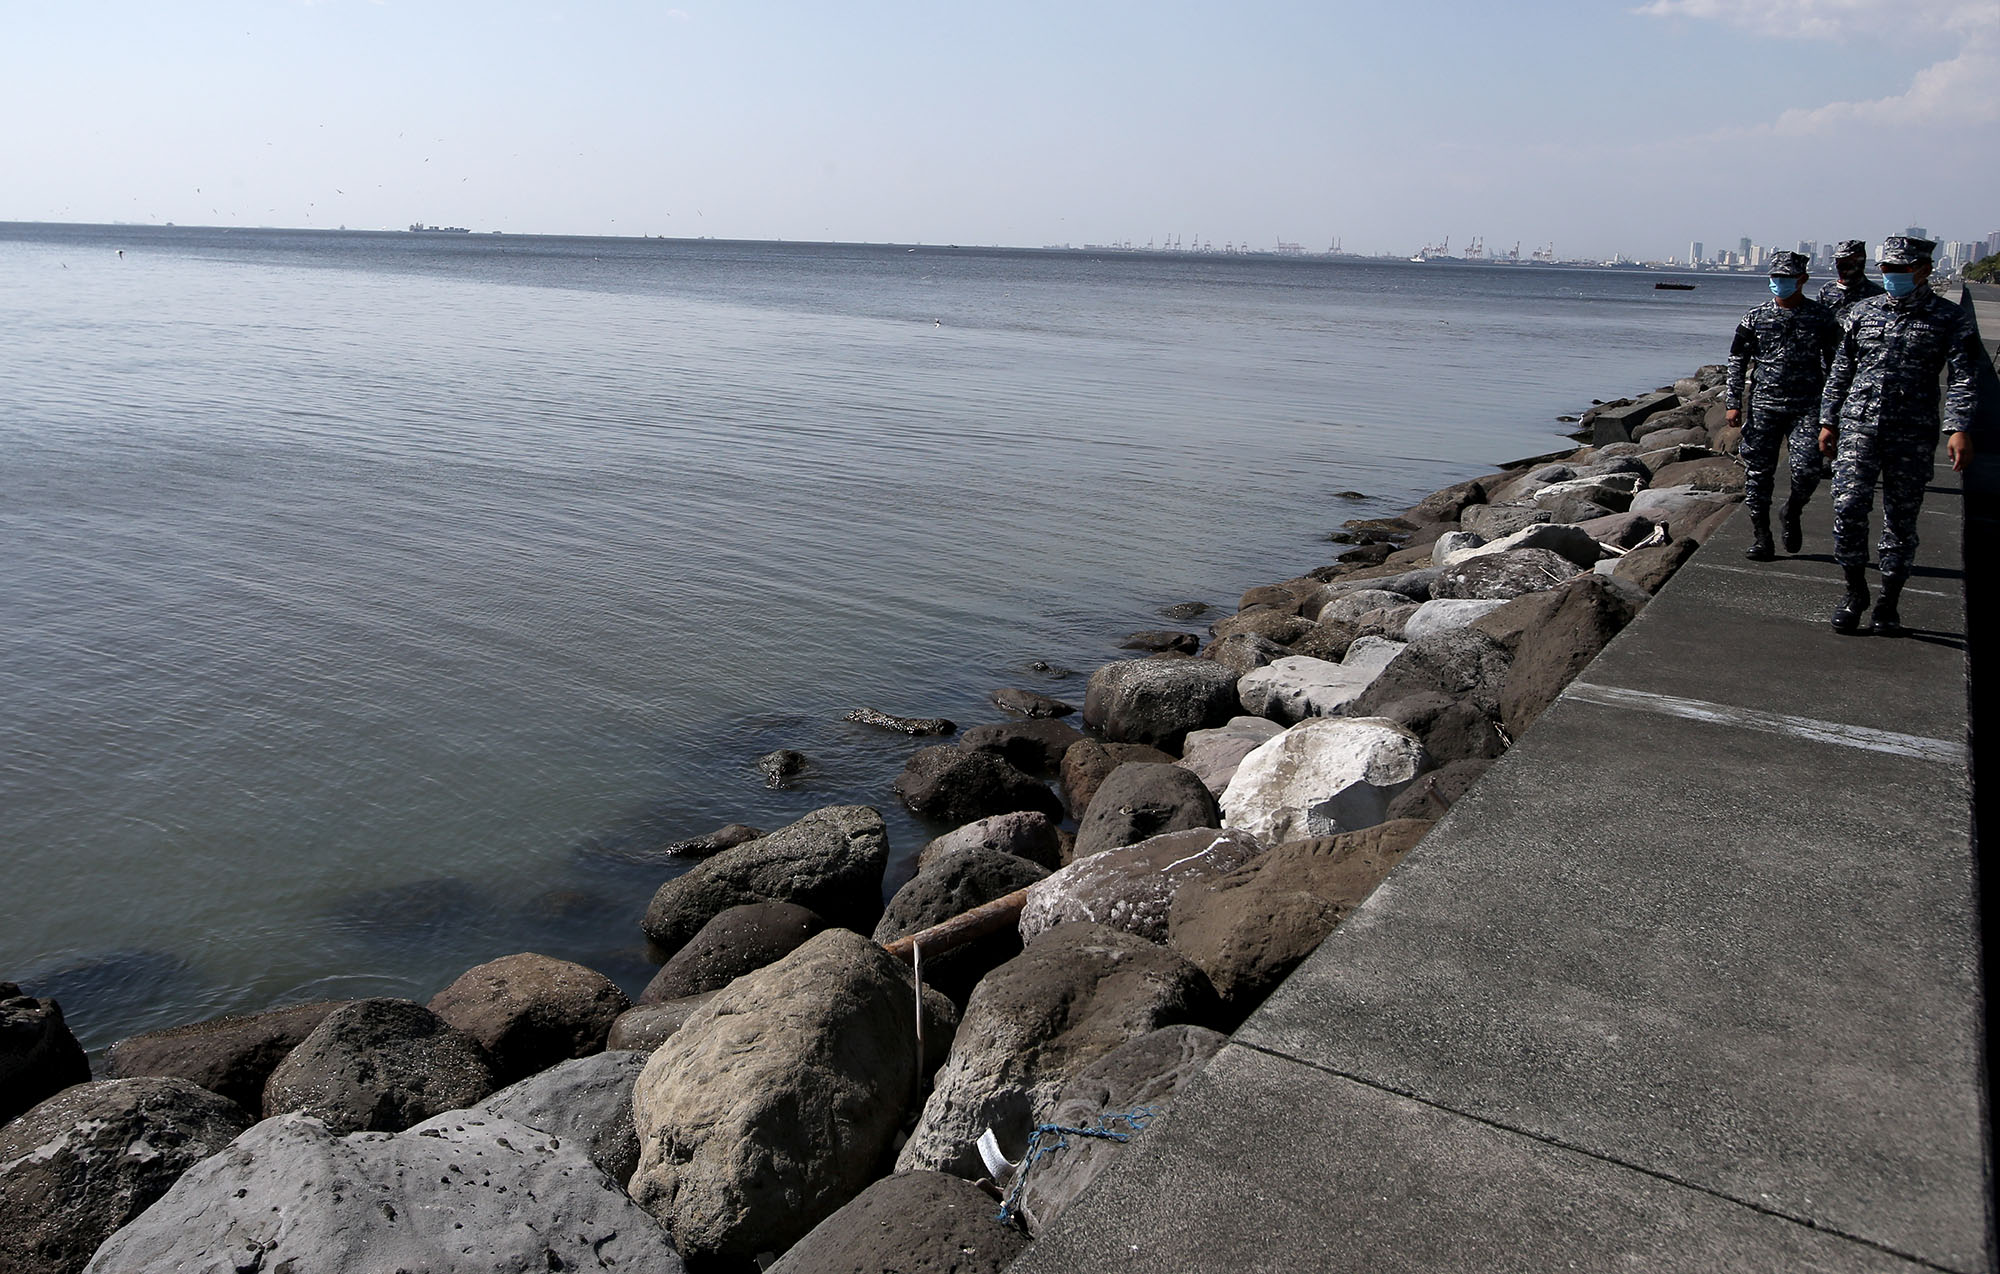 MANILA BAY GREENISH COLOR / MARCH 27, 2020 The water of Manila Bay at the portion of Mall of Asia in Pasay City turn into greenish colour amid the enhanced community quarantine. INQUIRER PHOTO / RICHARD A. REYES